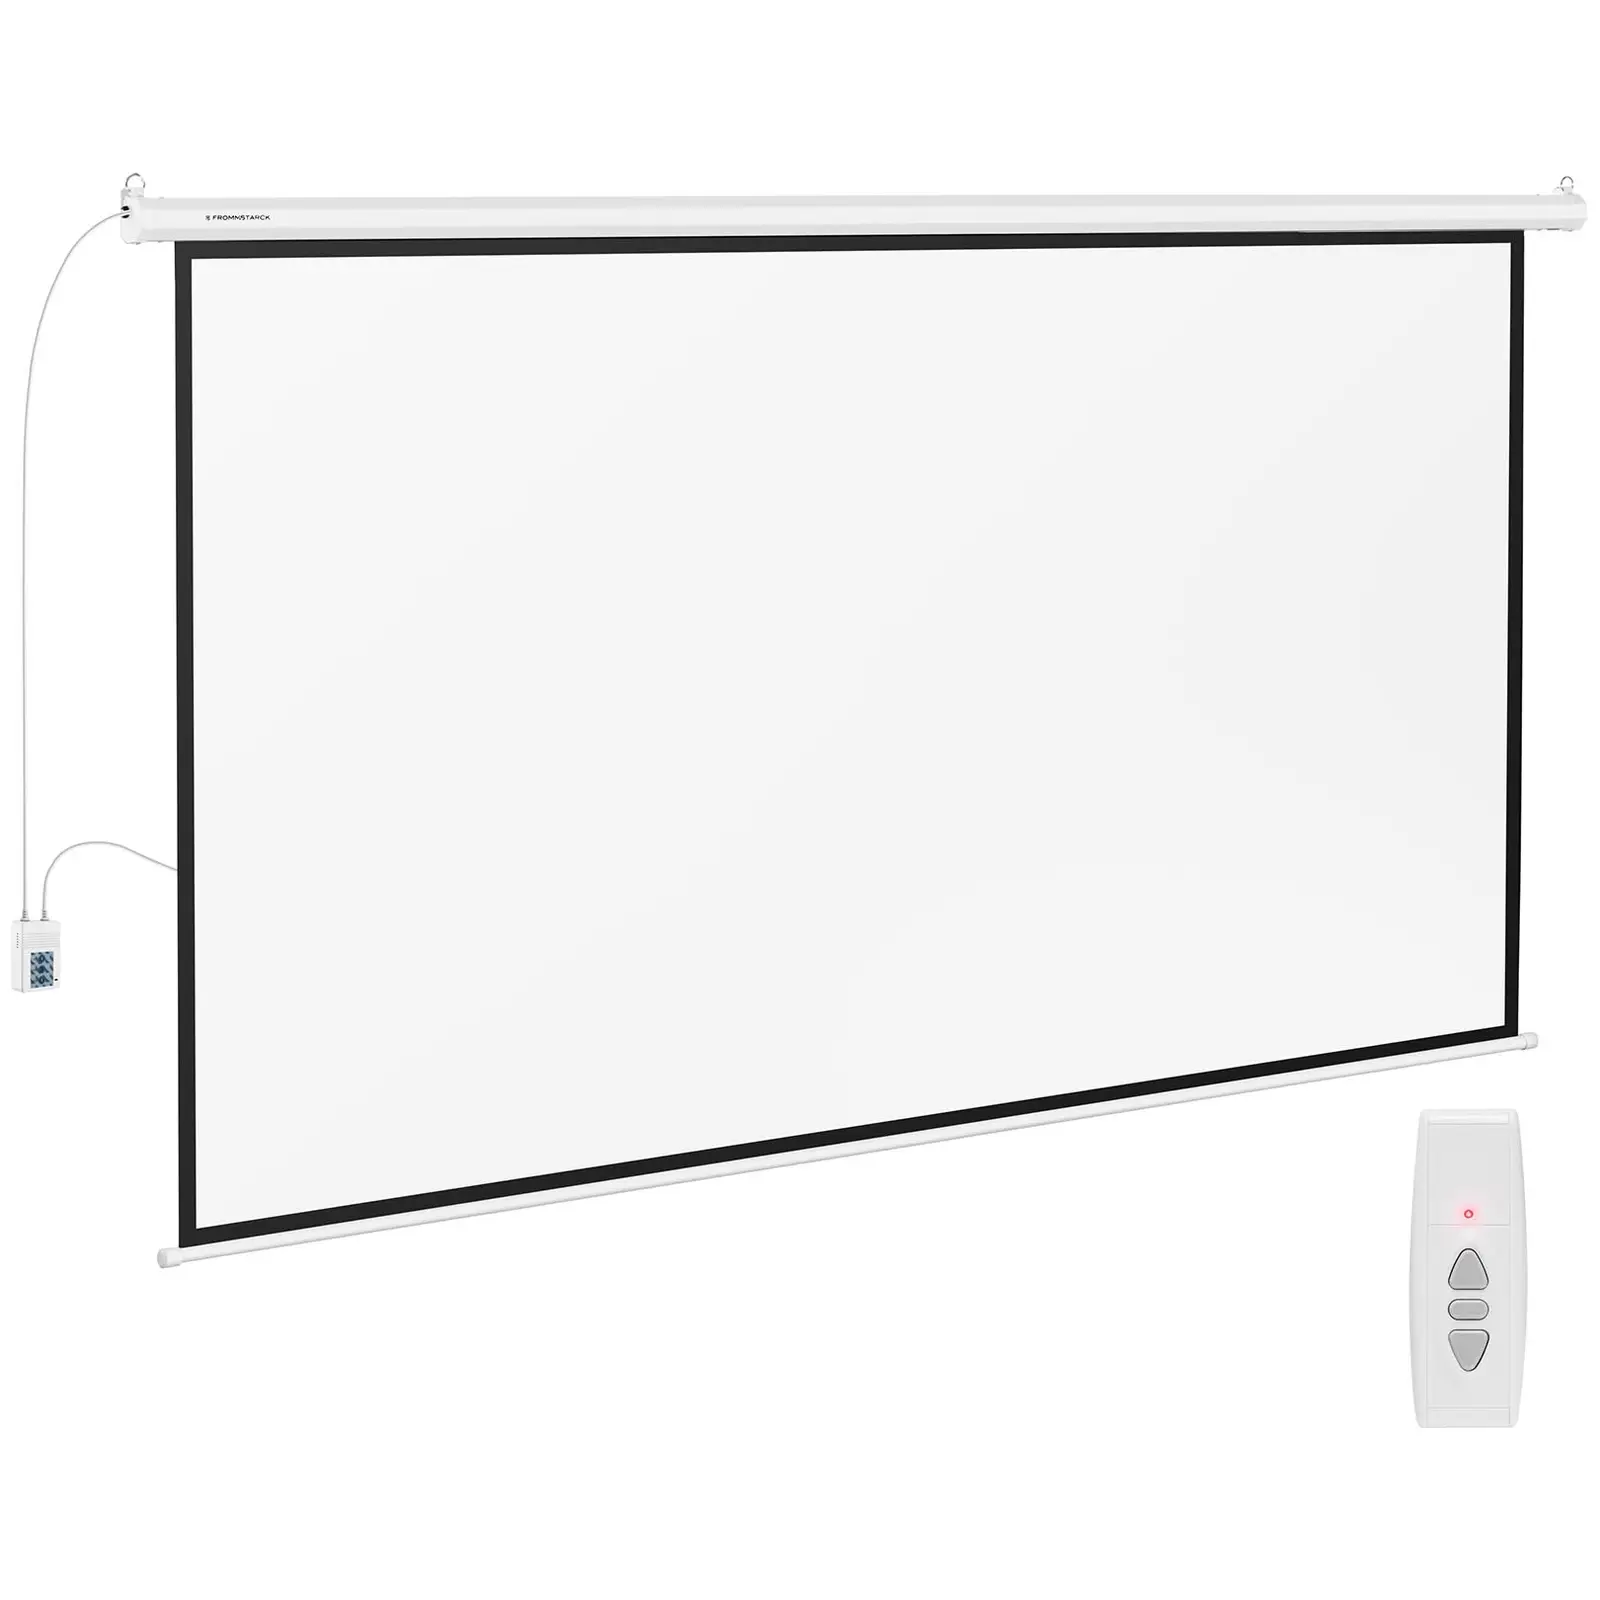 Projection Screen 302 x 201 cm 16:9 - Electric Projection Screens by Fromm & Starck